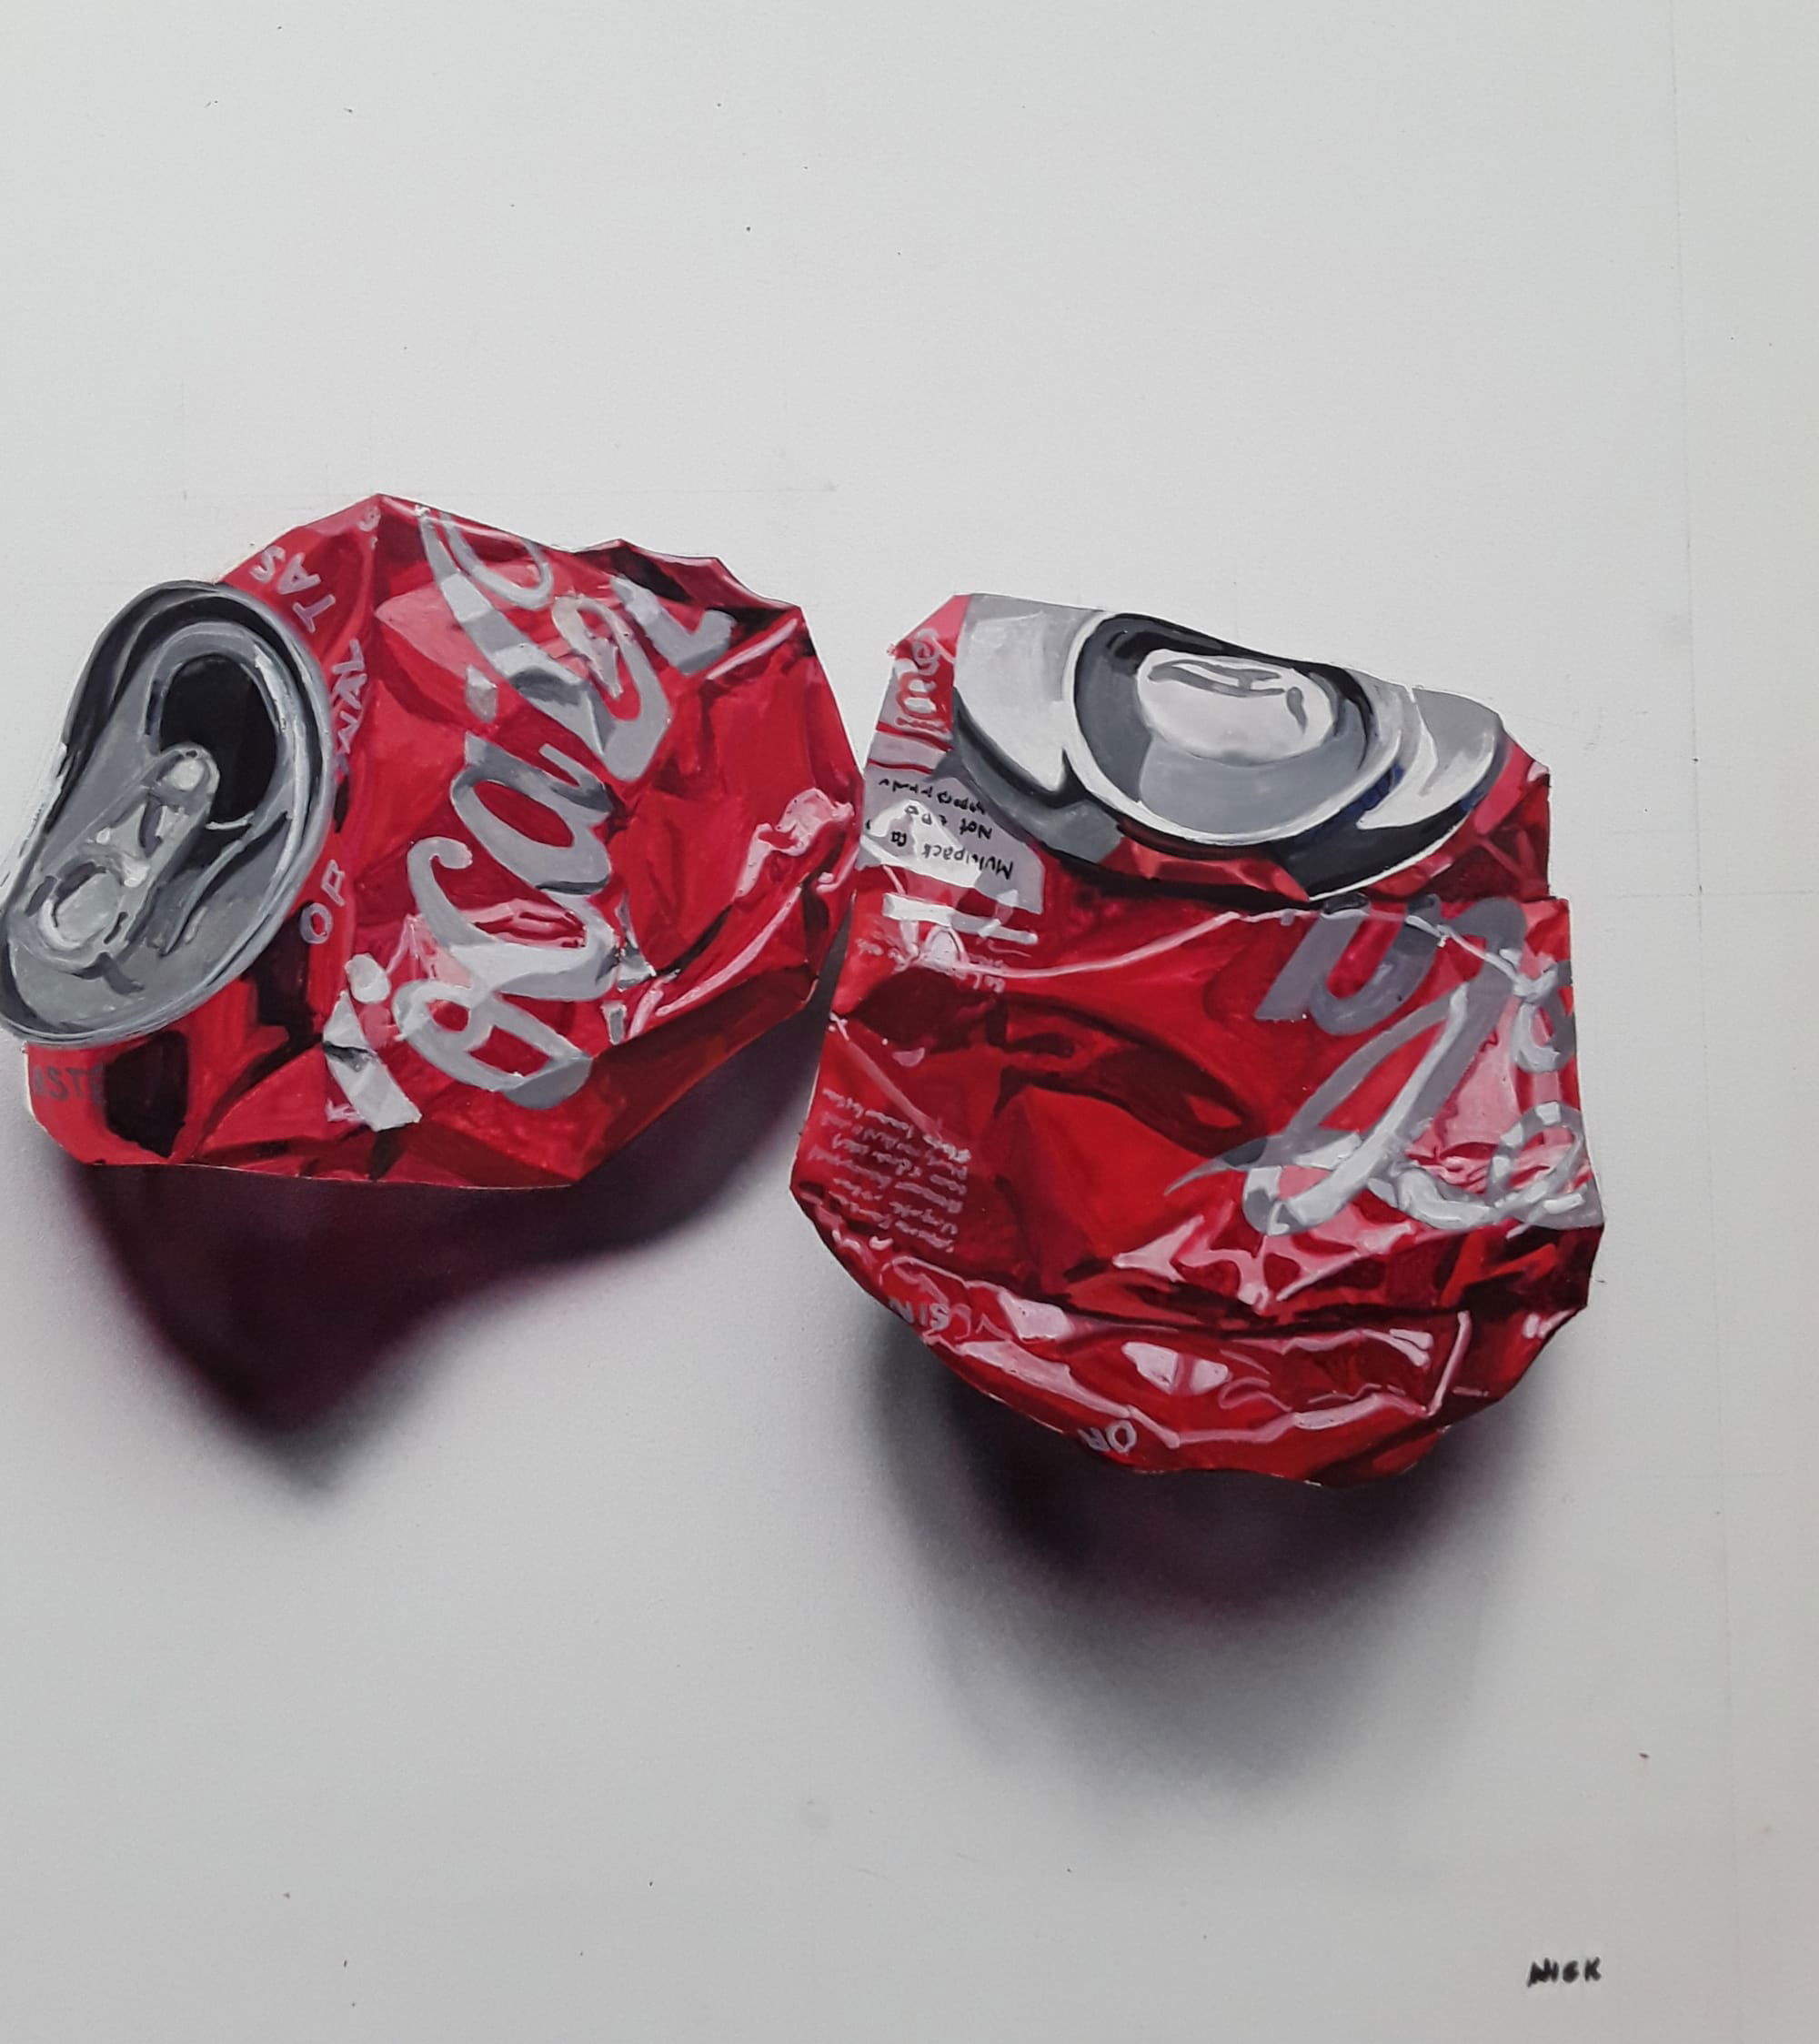 Sqaushed Coke cans